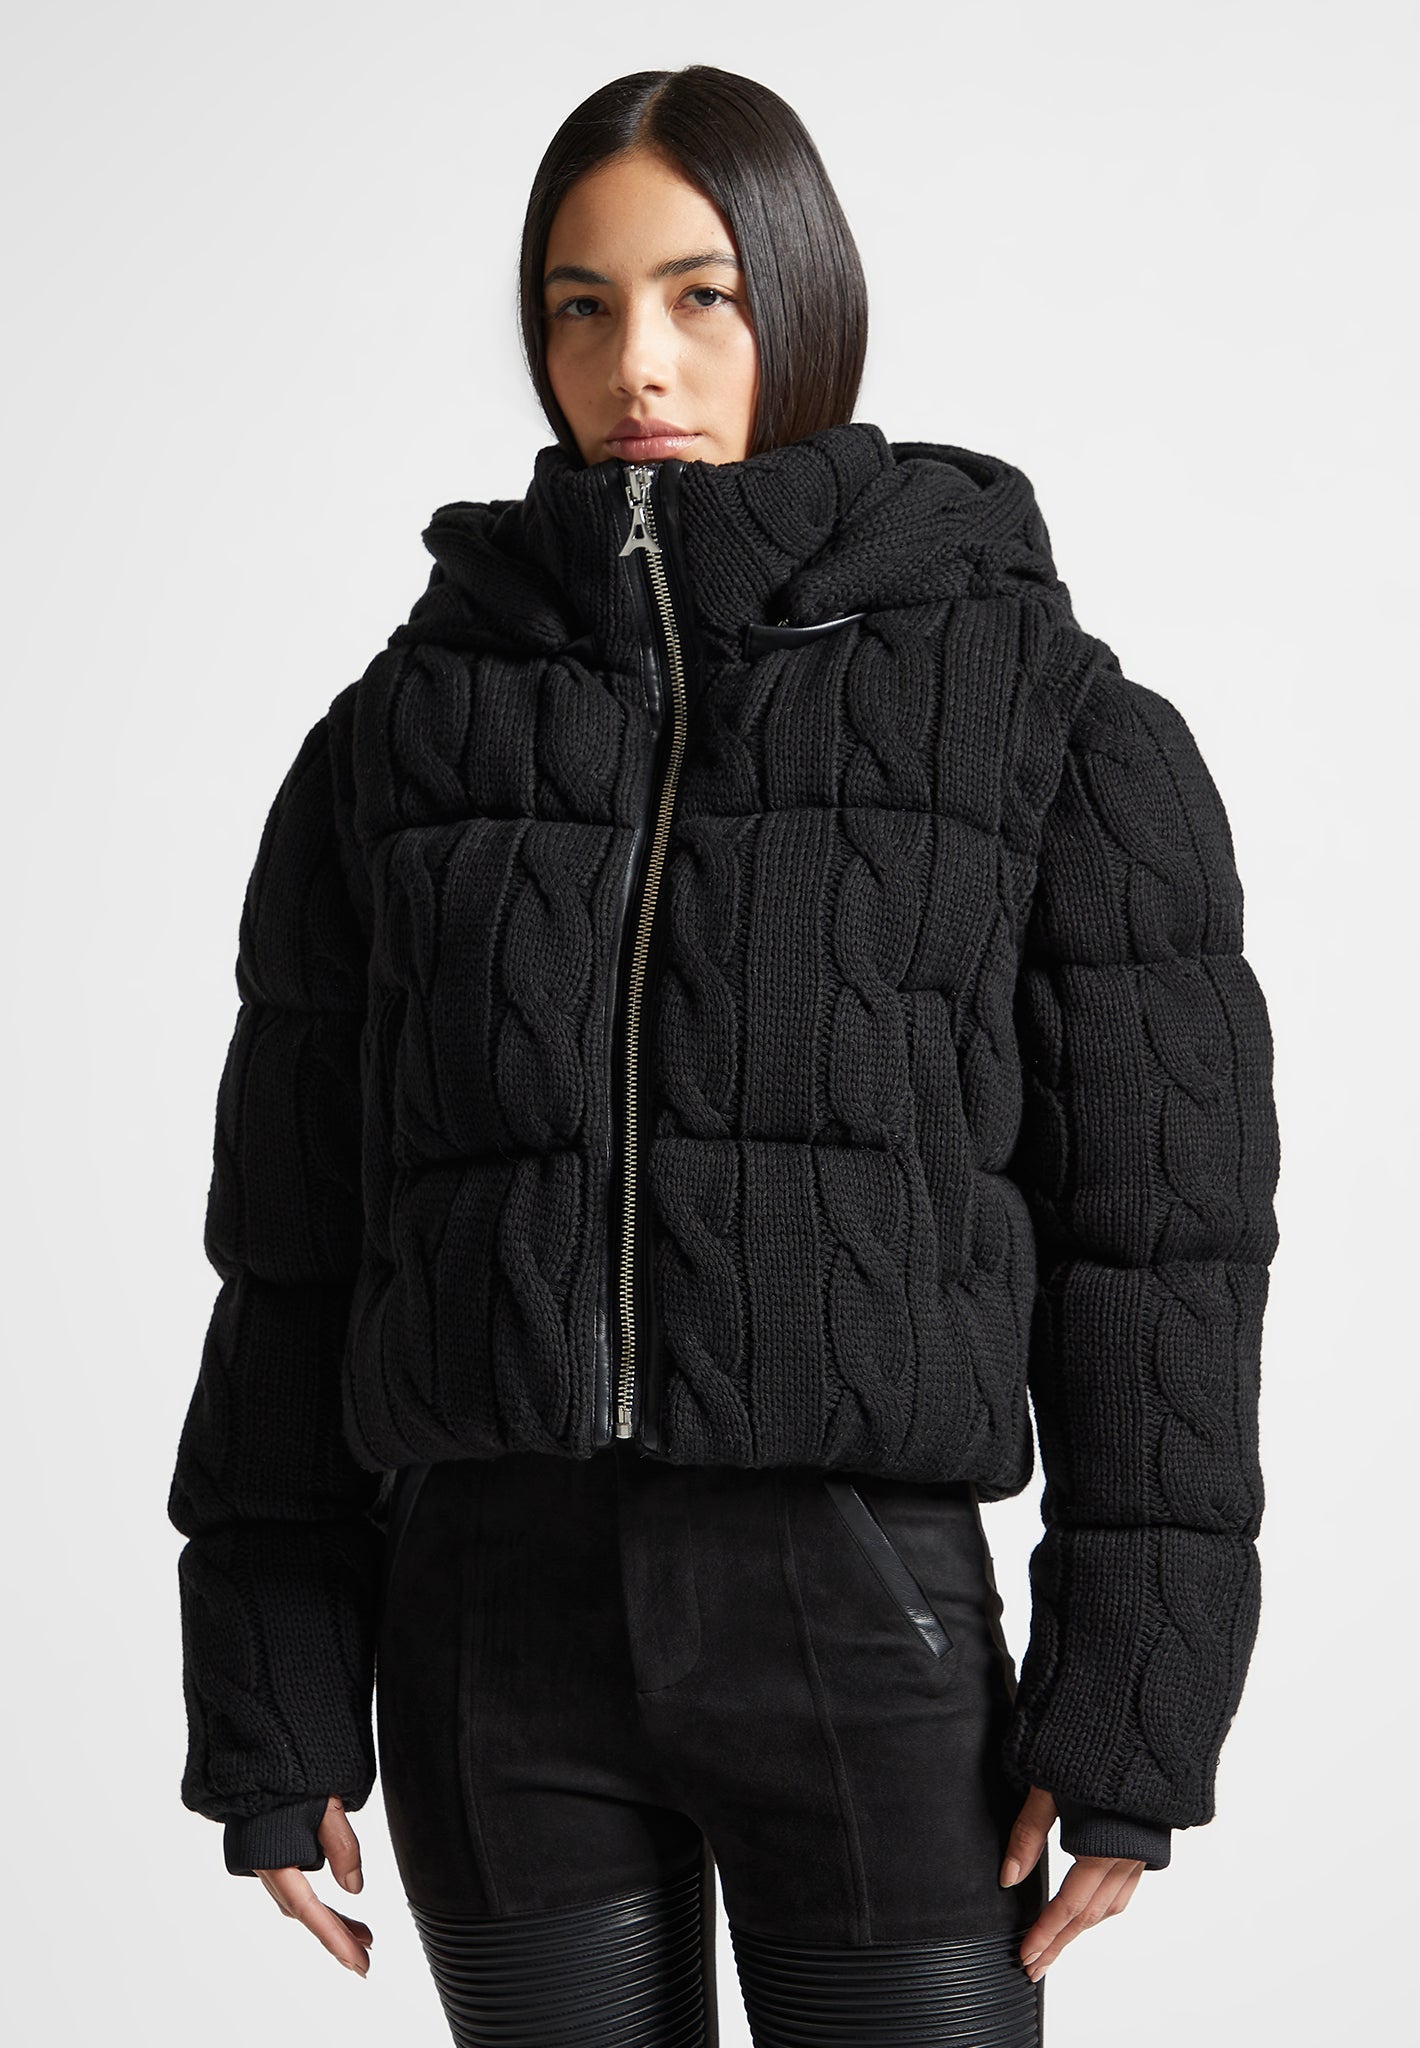 2-in-1 Cable Knit Puffer Jacket/Gilet - Black